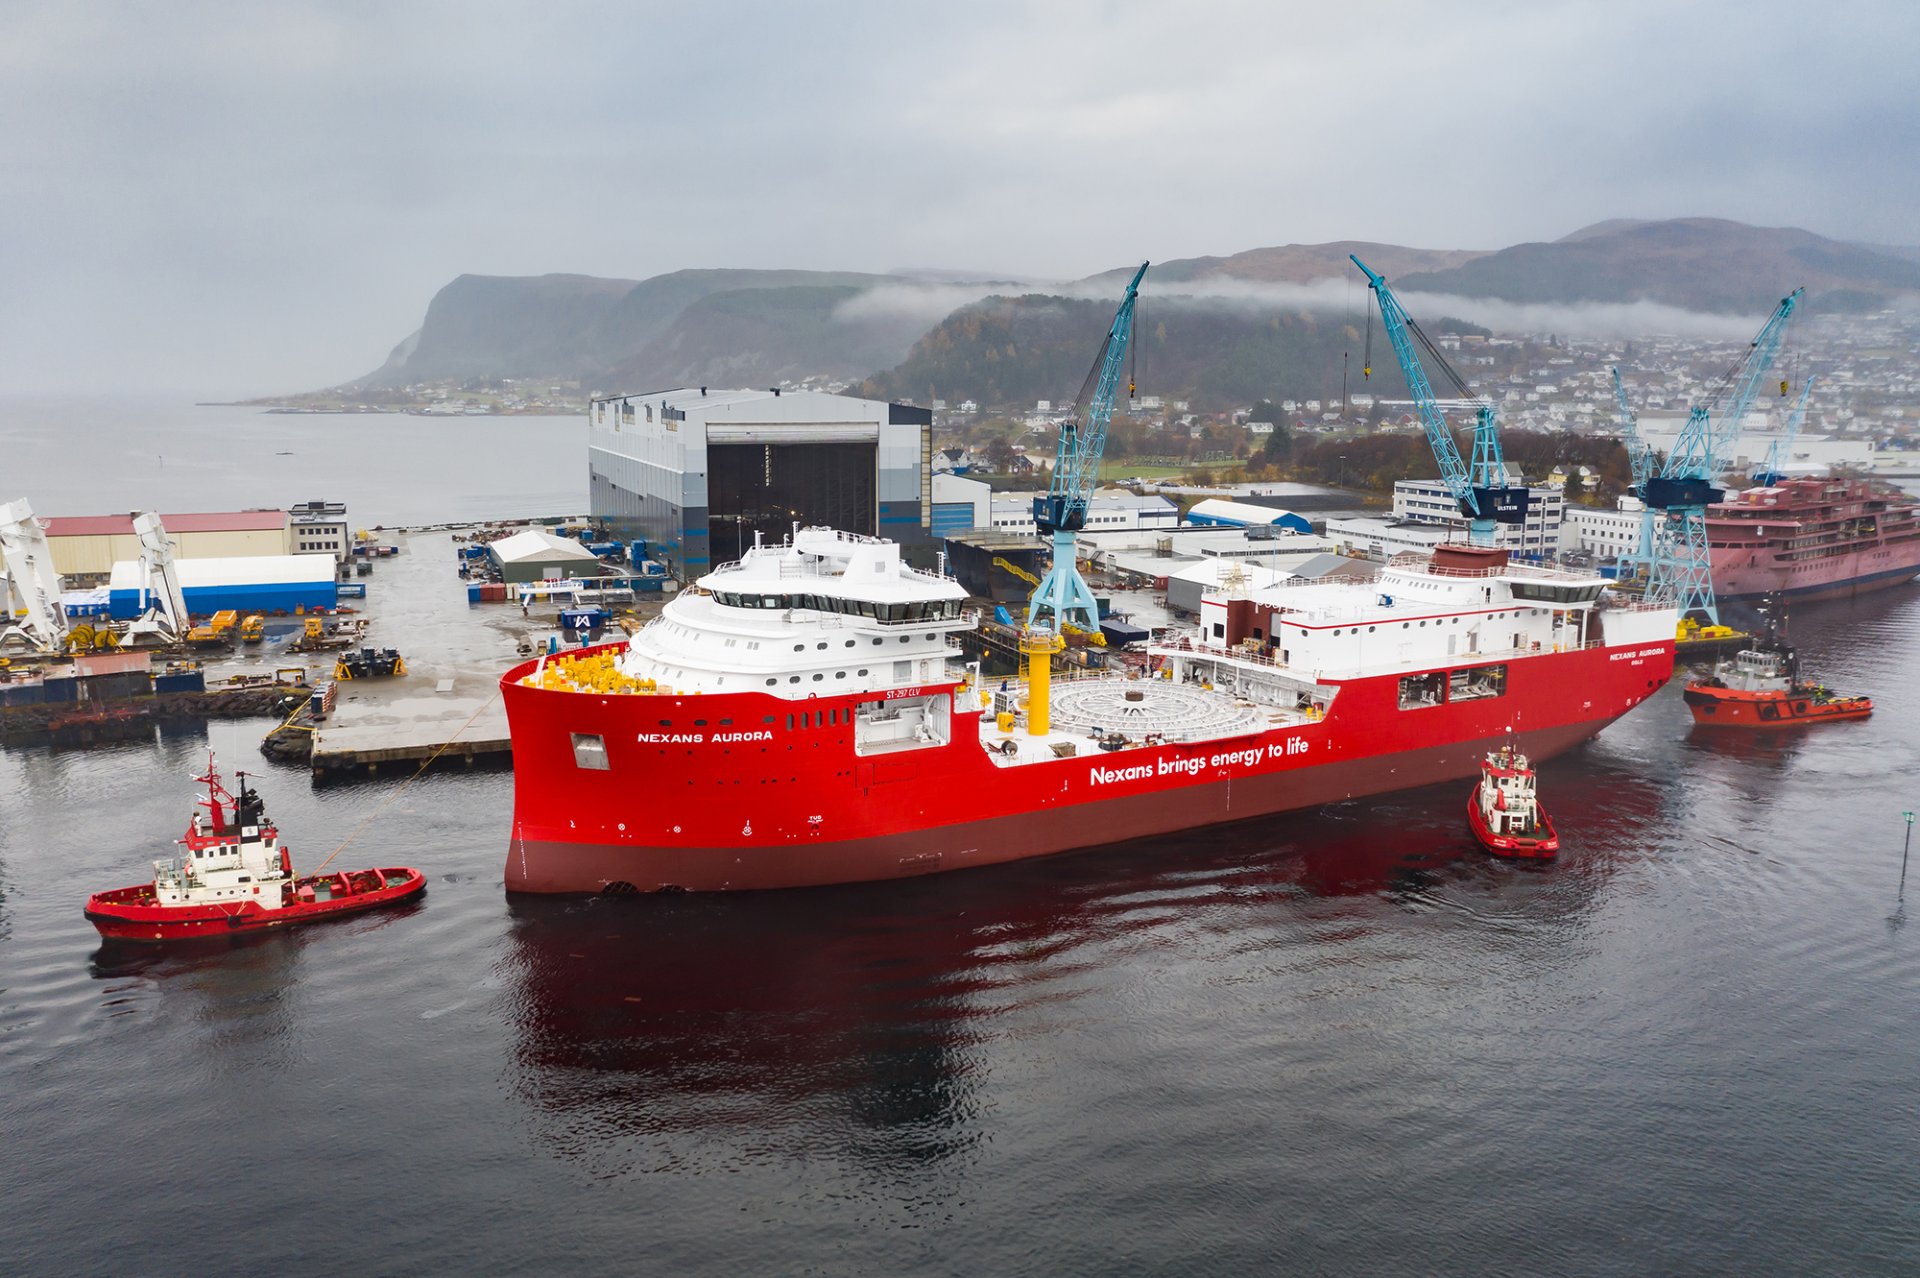 Spotted: Nexans Aurora launched at Ulstein Verft